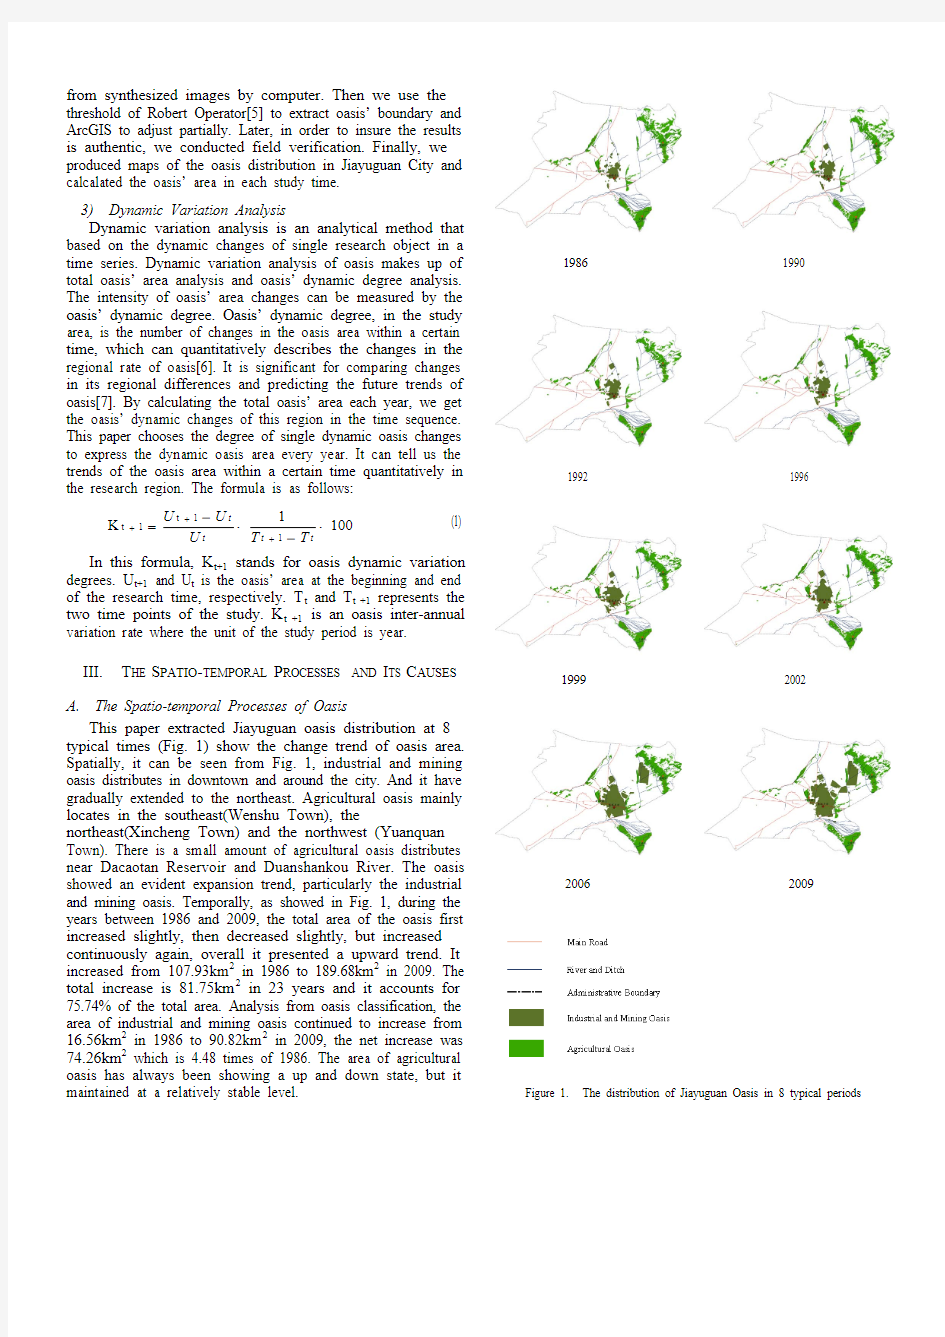 Spatio-temporal Processes and Causes Analysis of Jiayuguan Oasis in China over a 23a Period